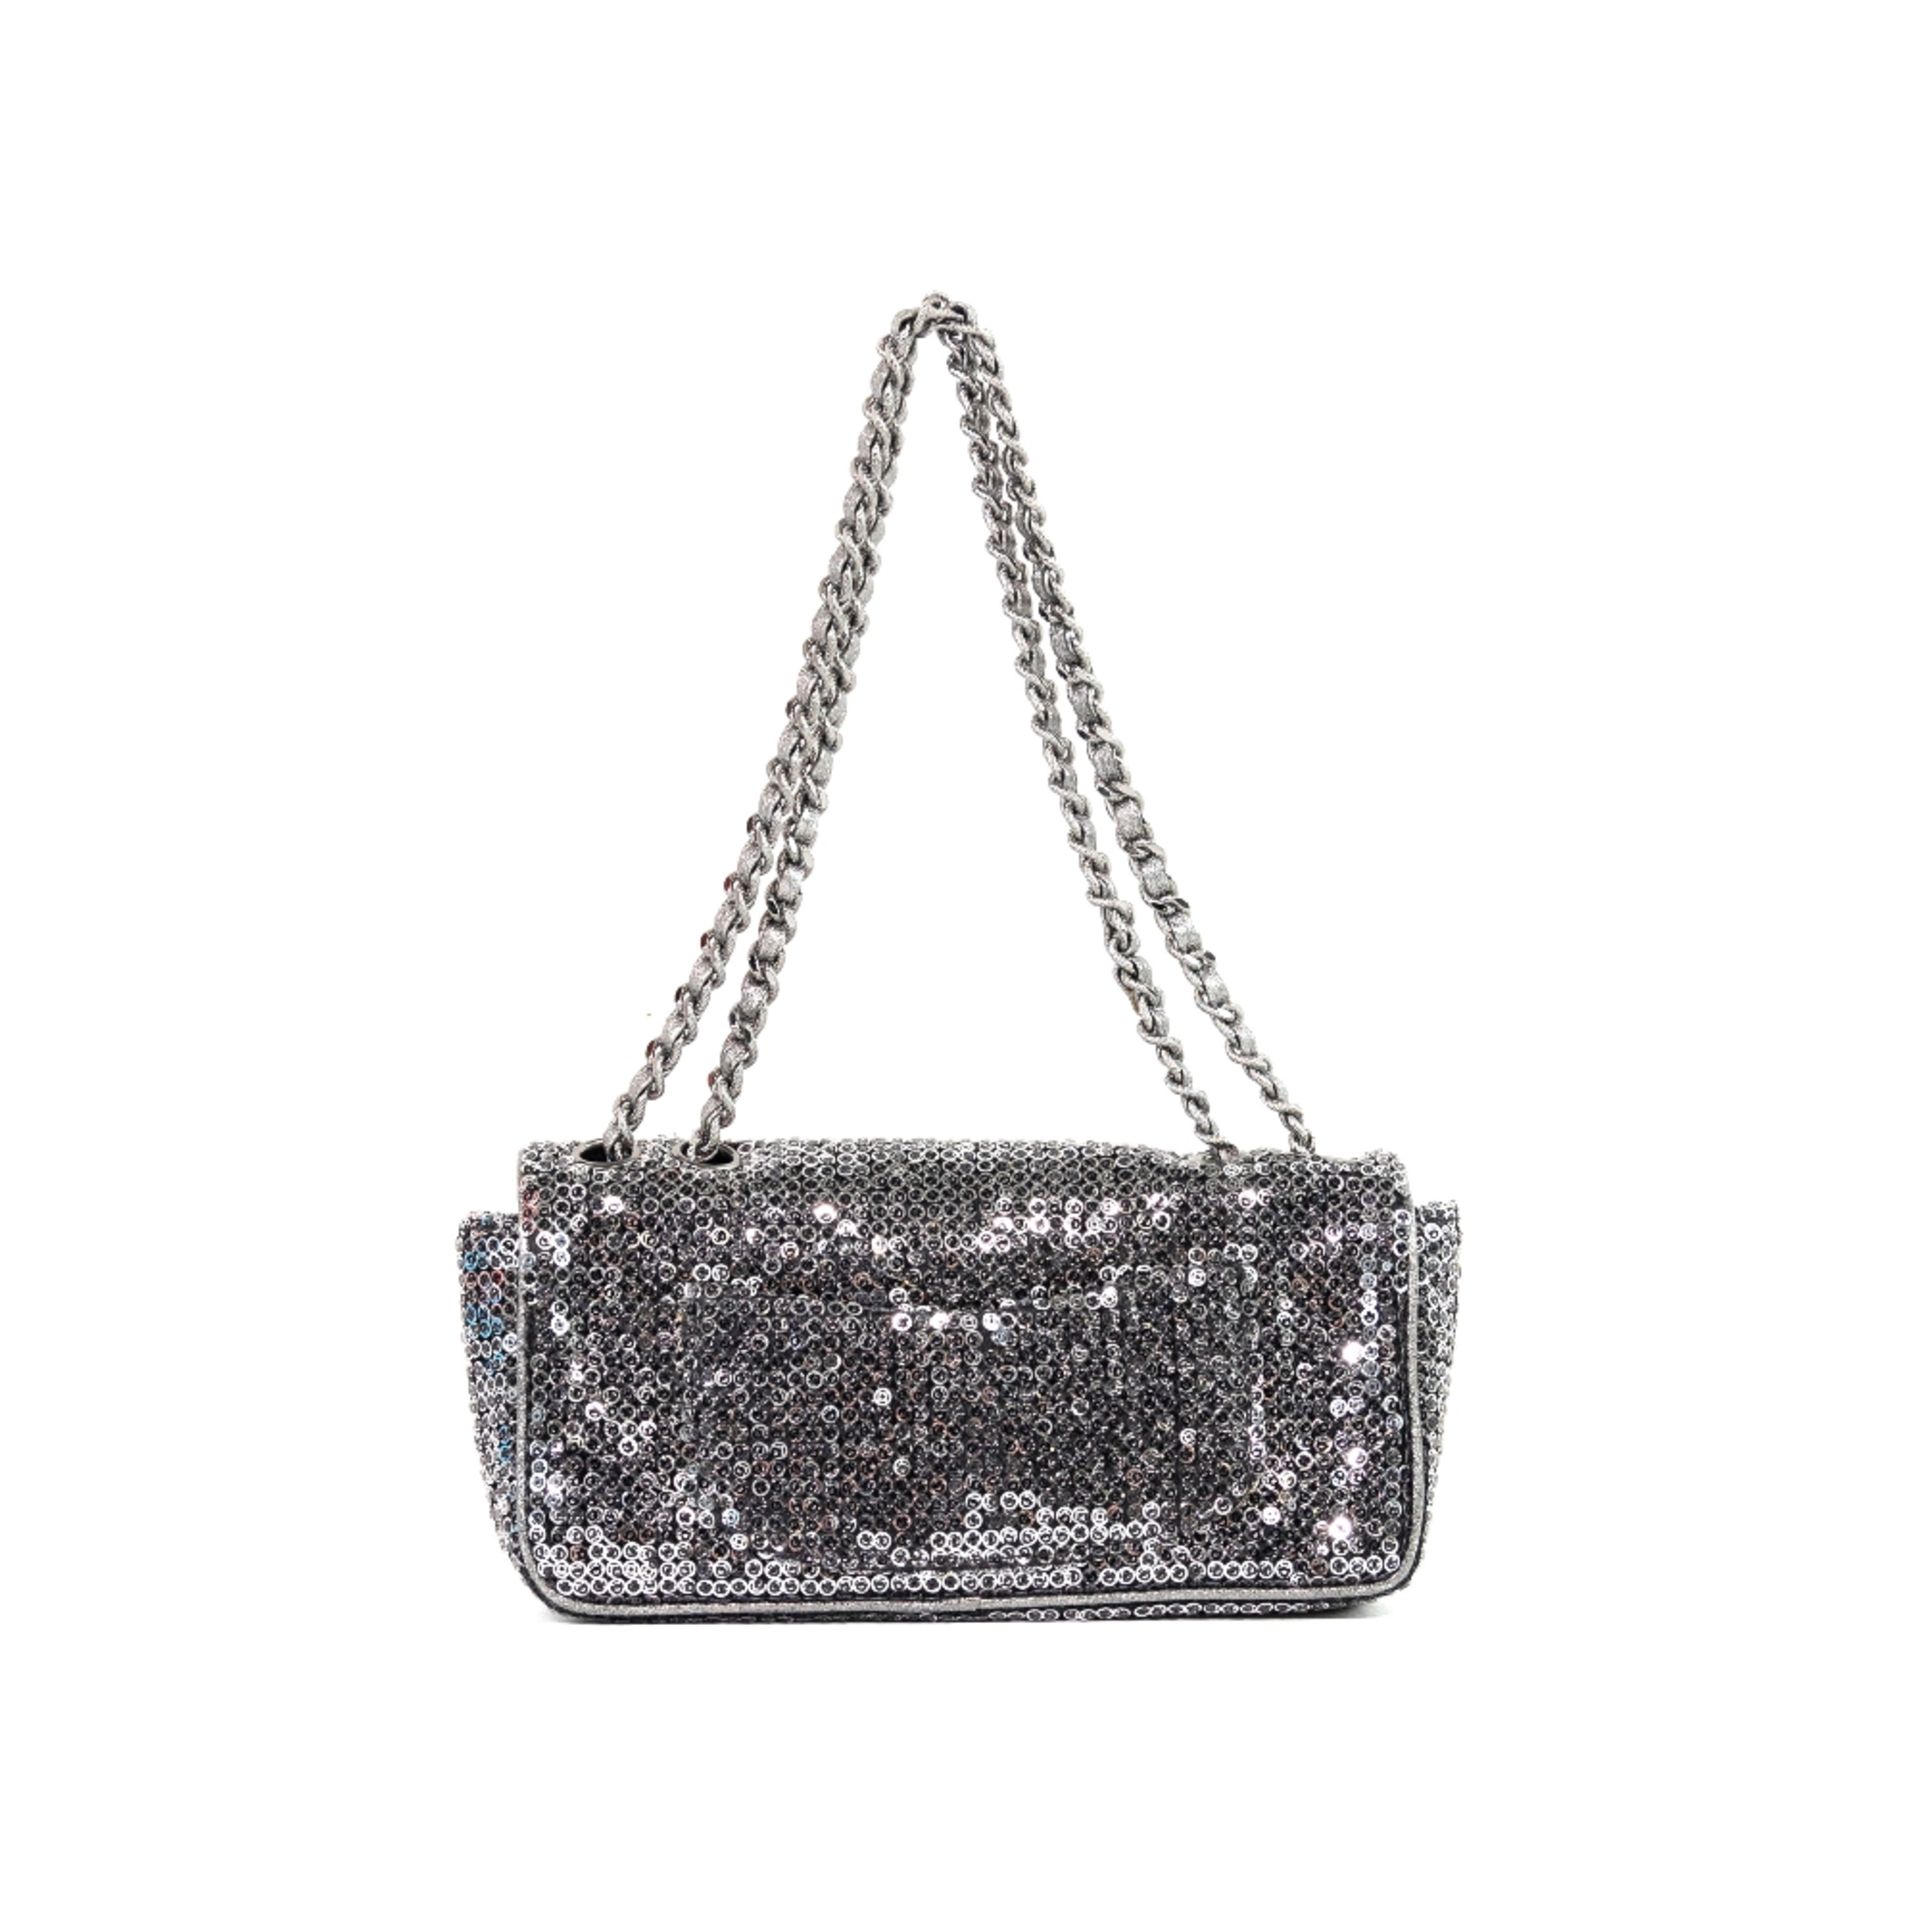 Chanel : Sac East West Sequin Argent - Image 2 of 2